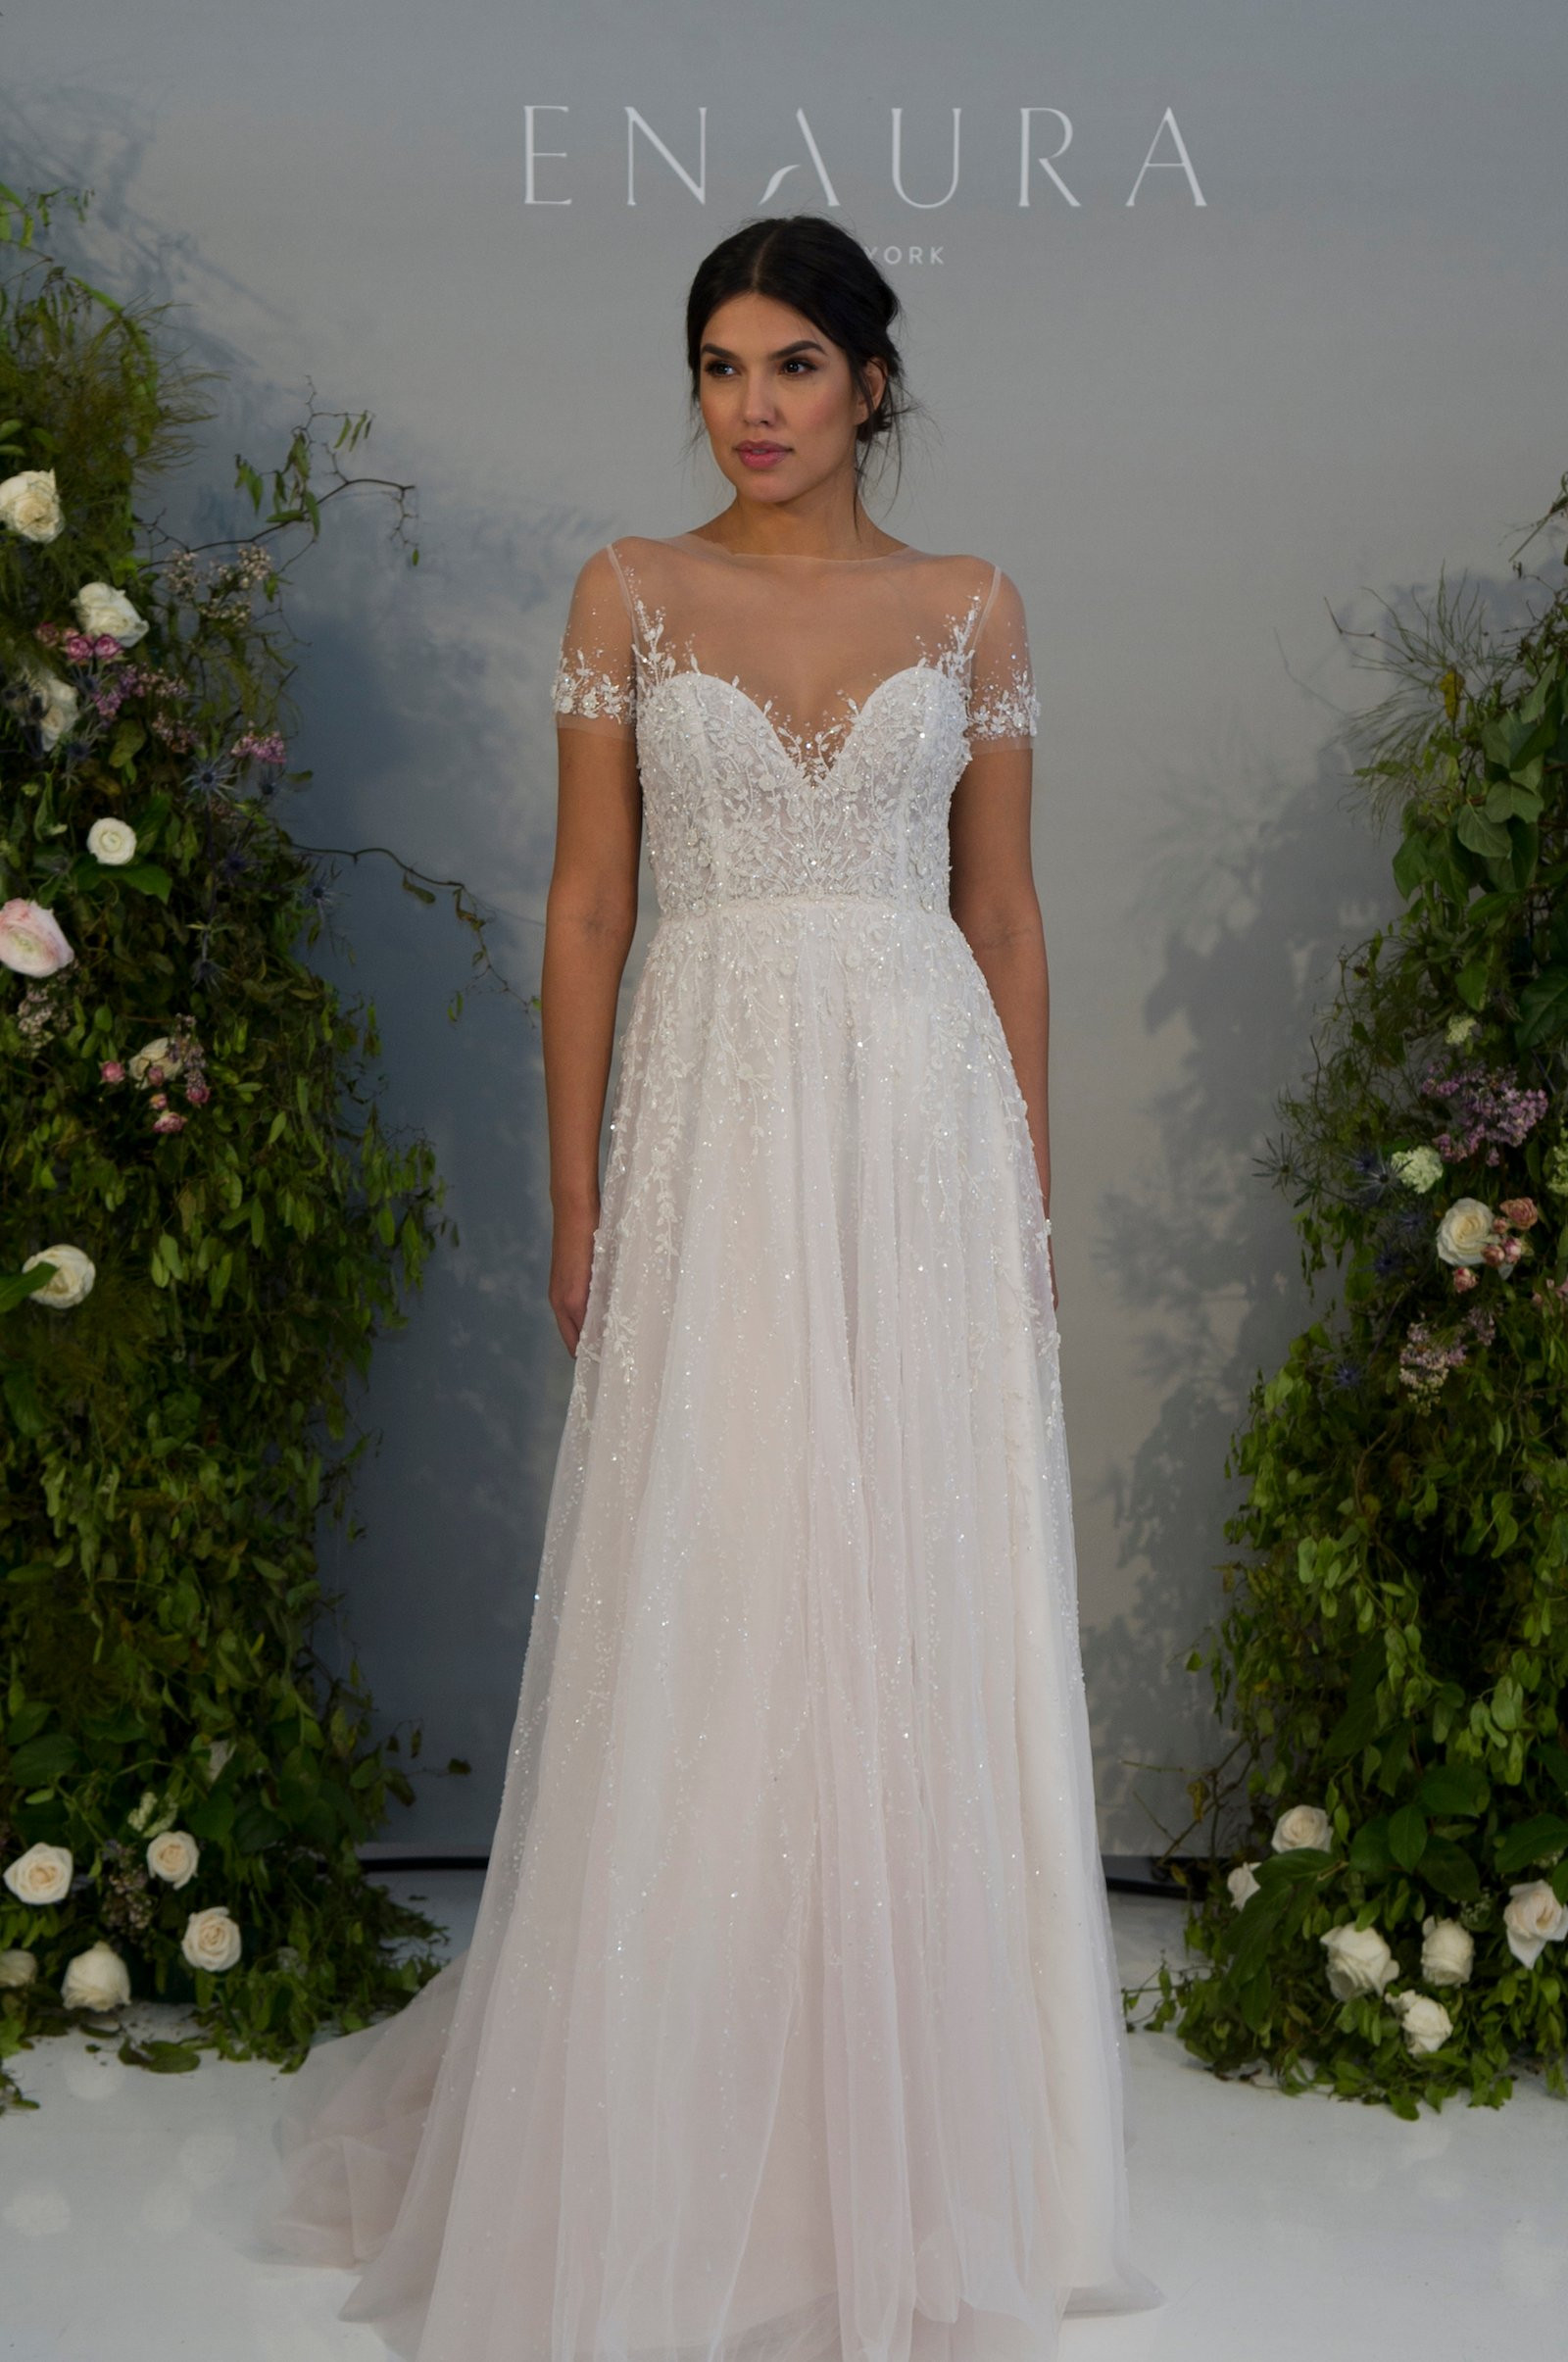 Bridal Looks 2020
 5 Top Trends from New York Bridal Fashion Week Spring 2020